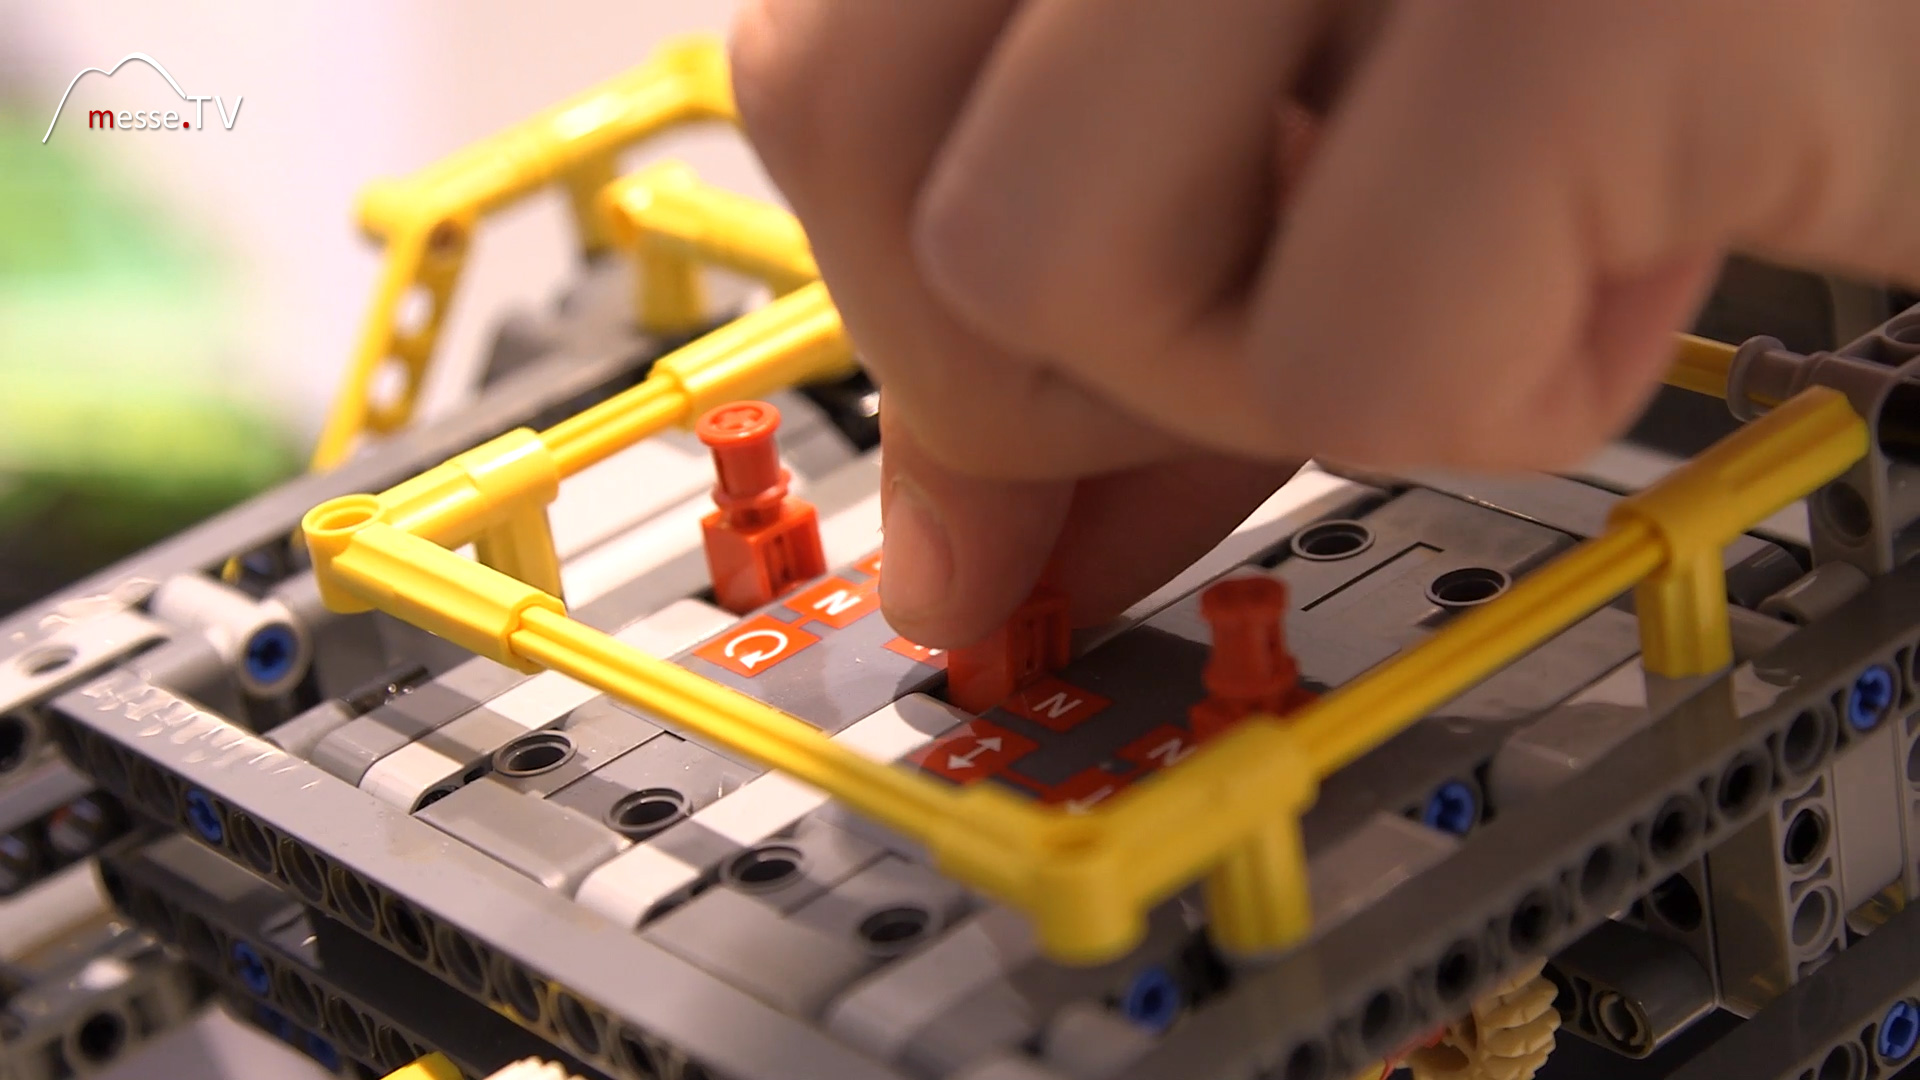 Building a shovel excavator from Lego